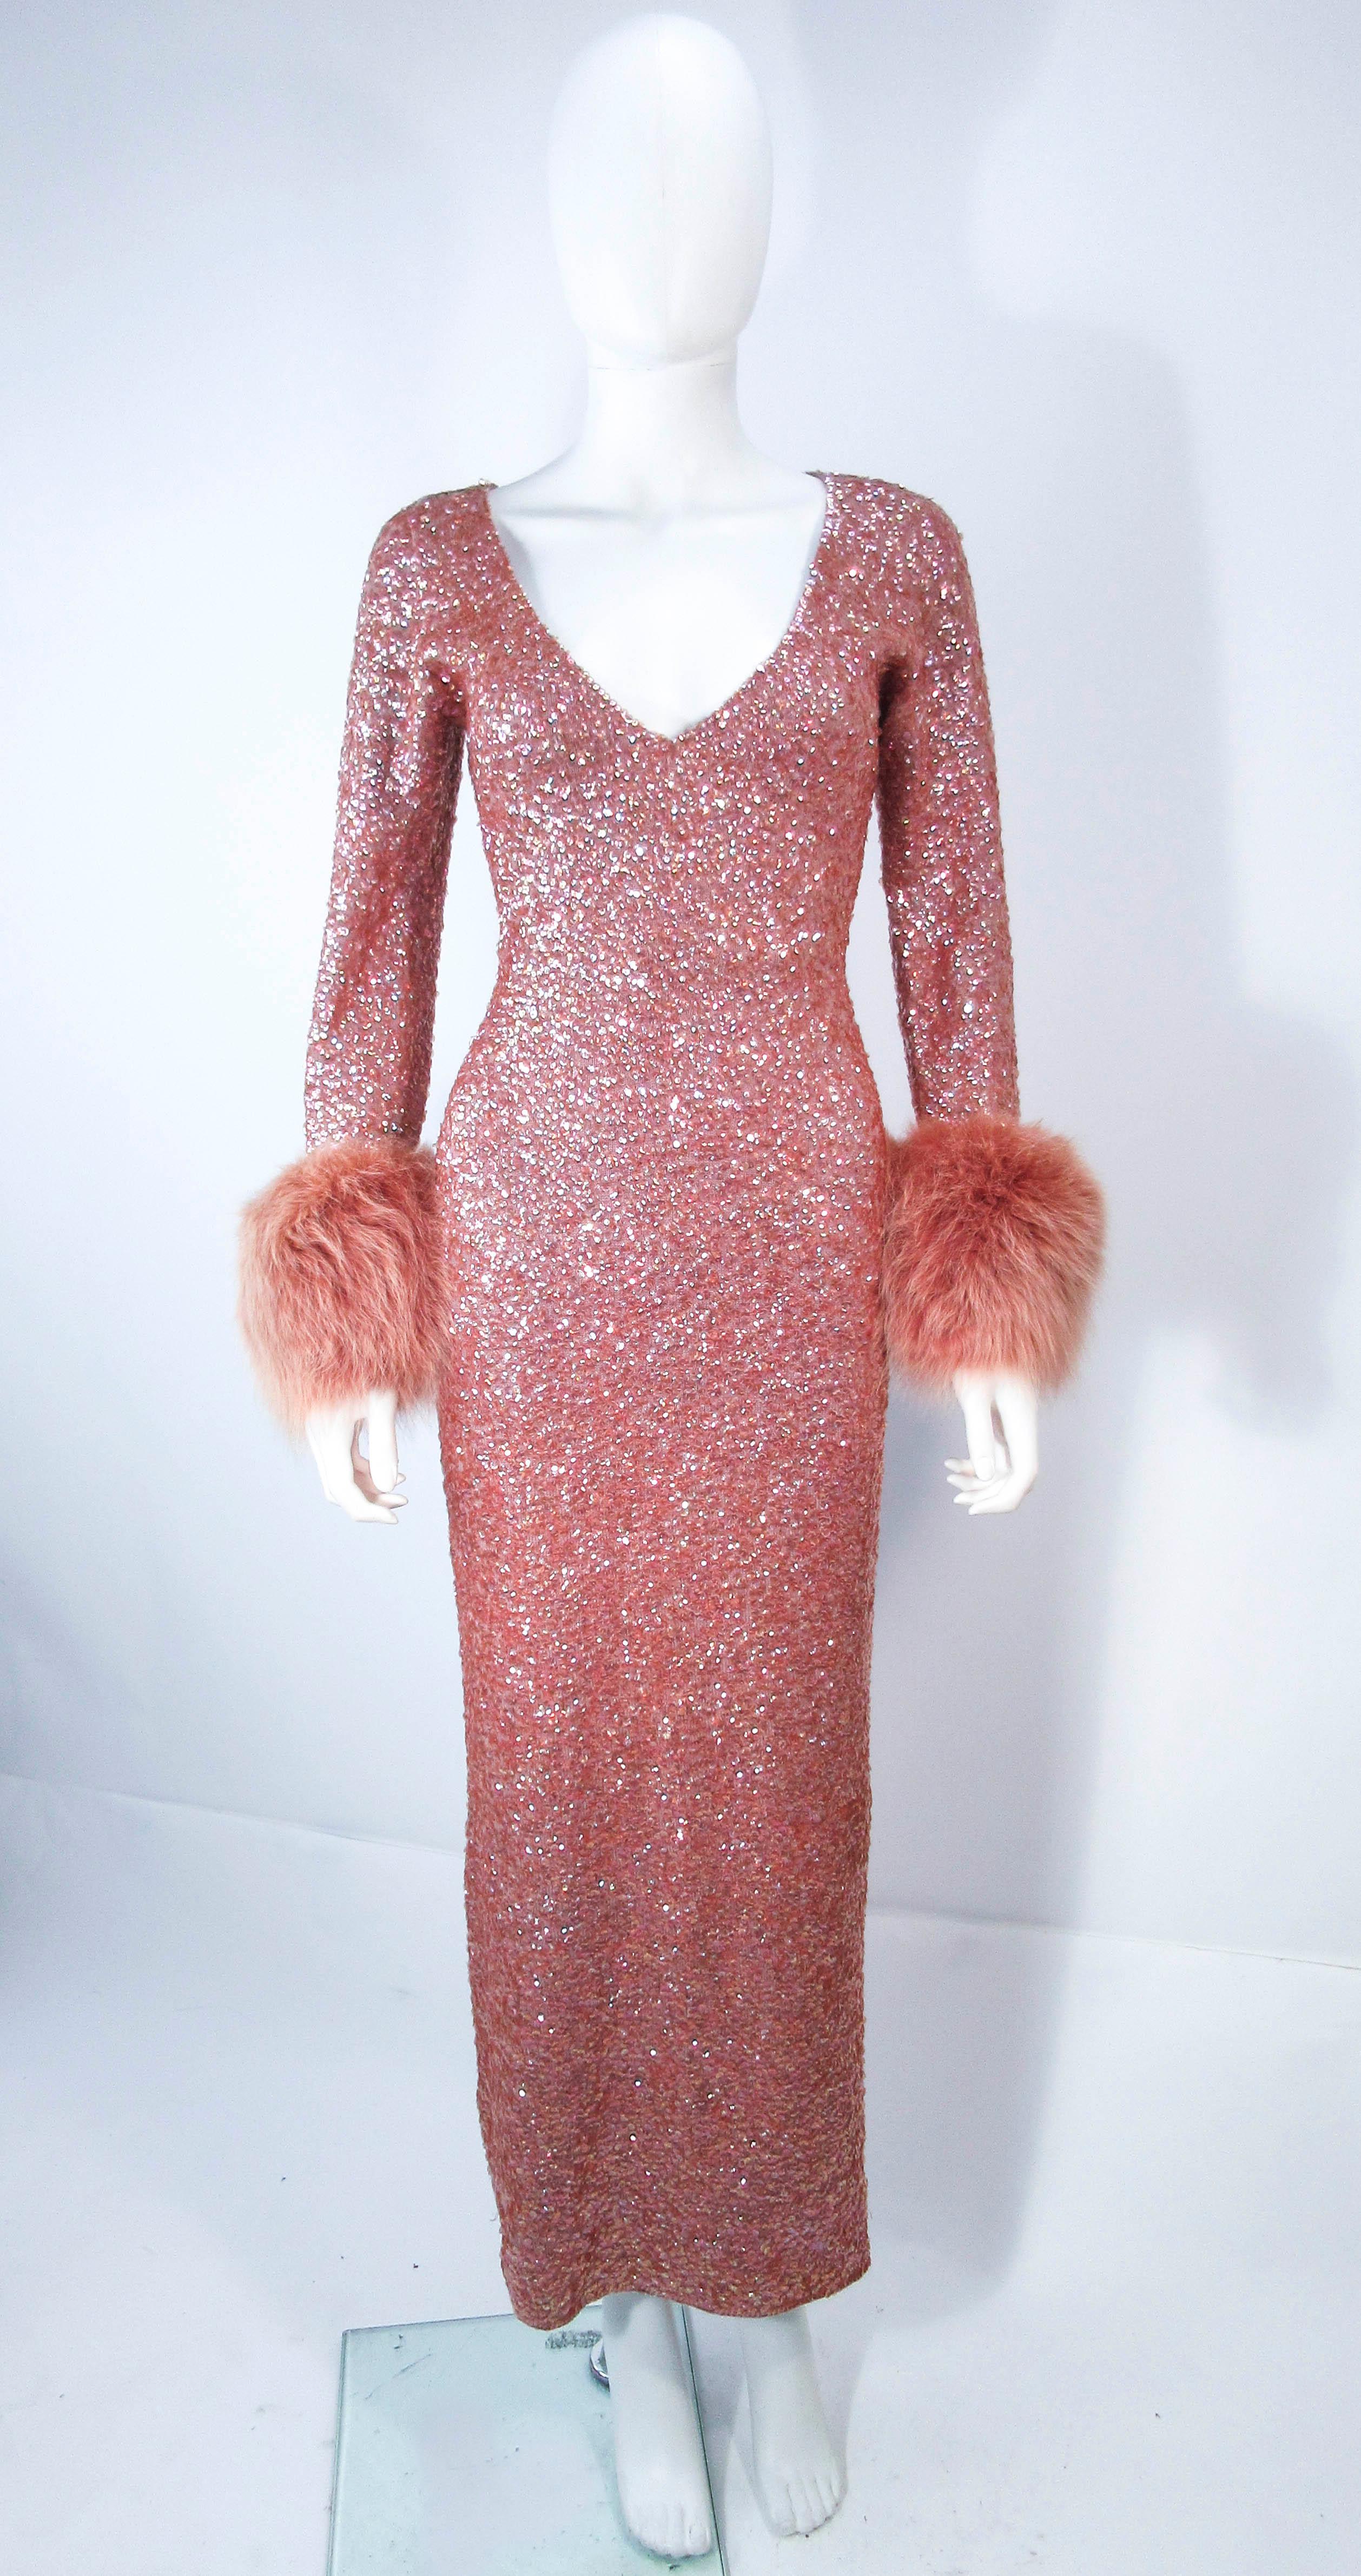 This is a fantastic vintage design, which is composed of a pink/apricot hue knit wool with iridescent sequin applique. Features fox fur cuffs. This is a pull on style which can be style with the v-plunge front or to the back. In excellent vintage